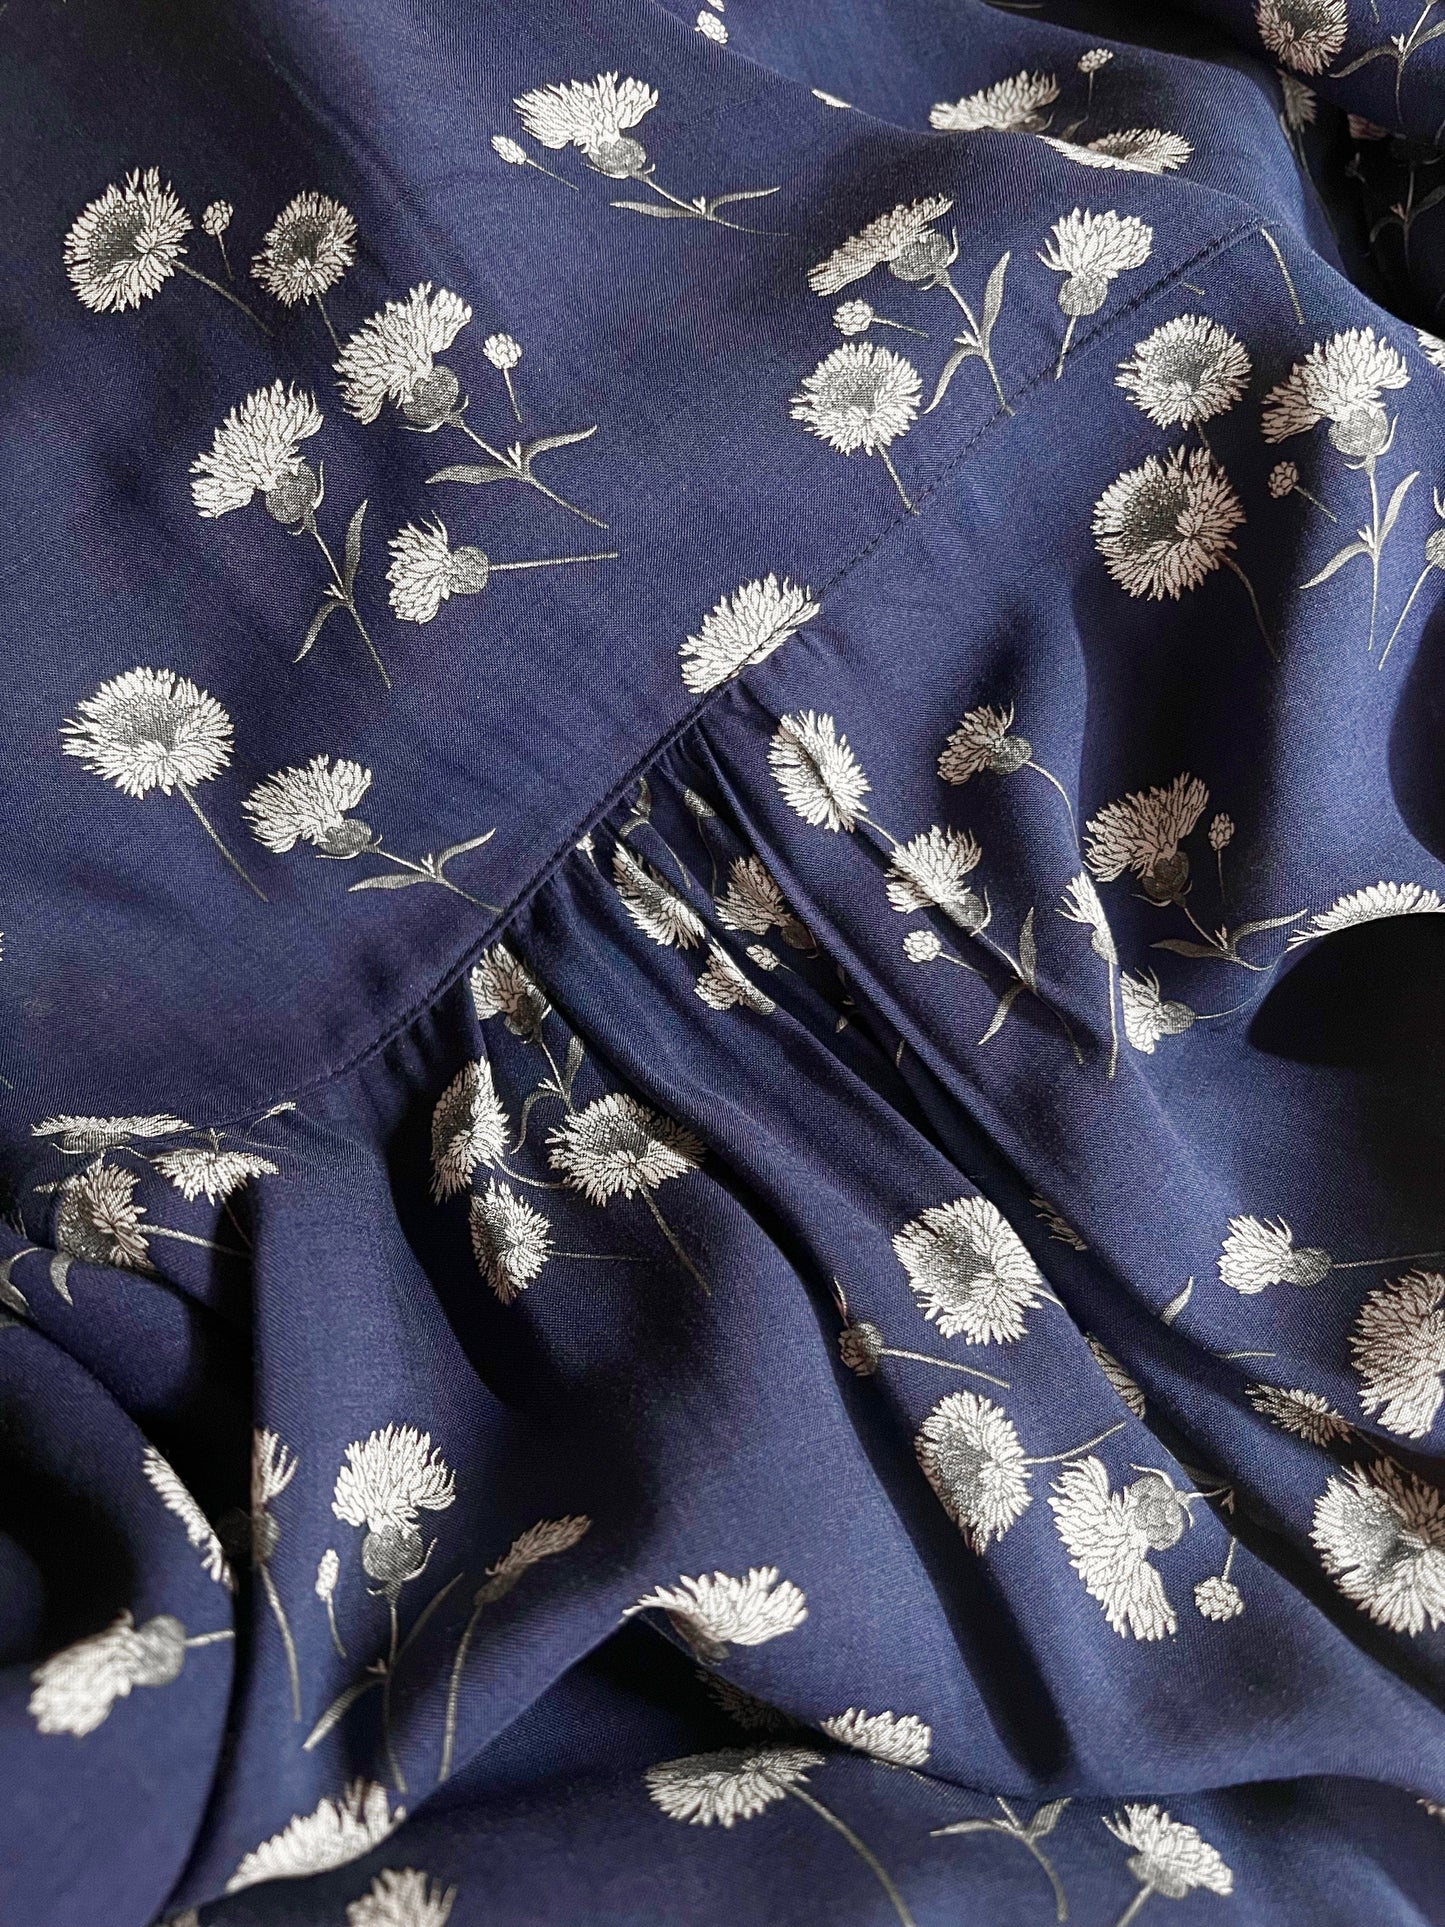 Long large blouse with white flowers on a navy blue background and ruching detail